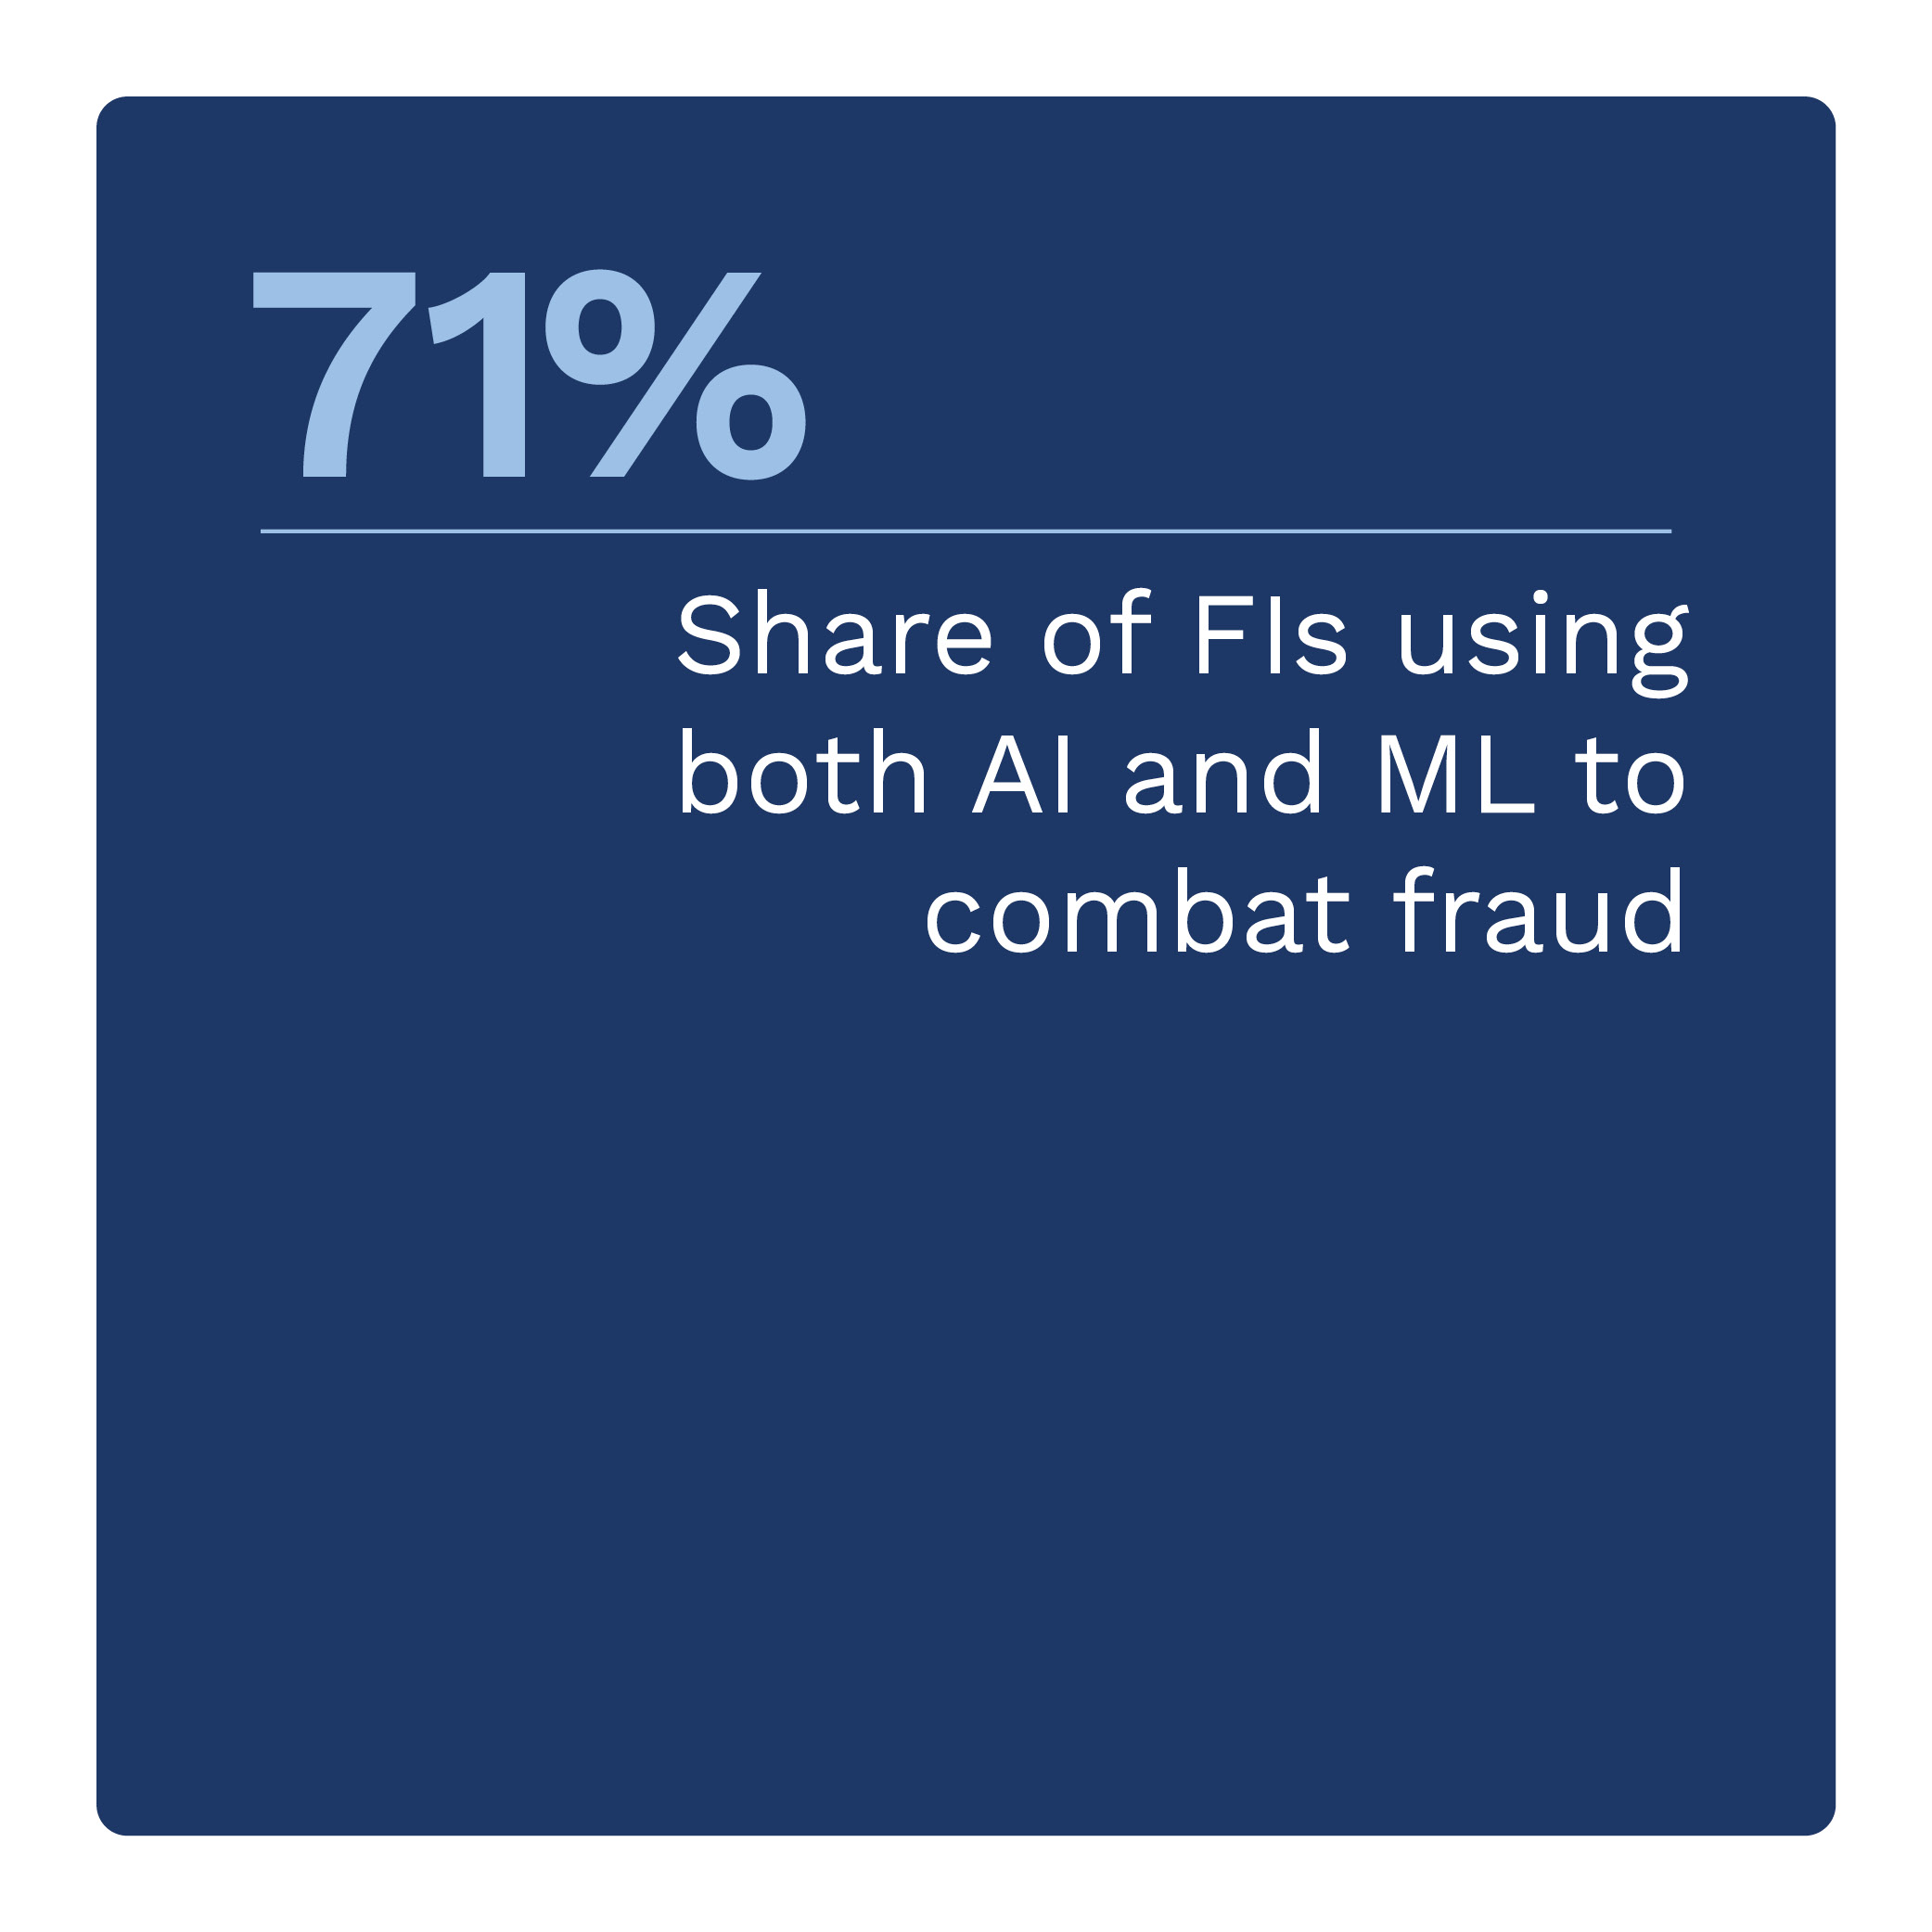 71%: Share of FIs using both AI and ML to combat fraud